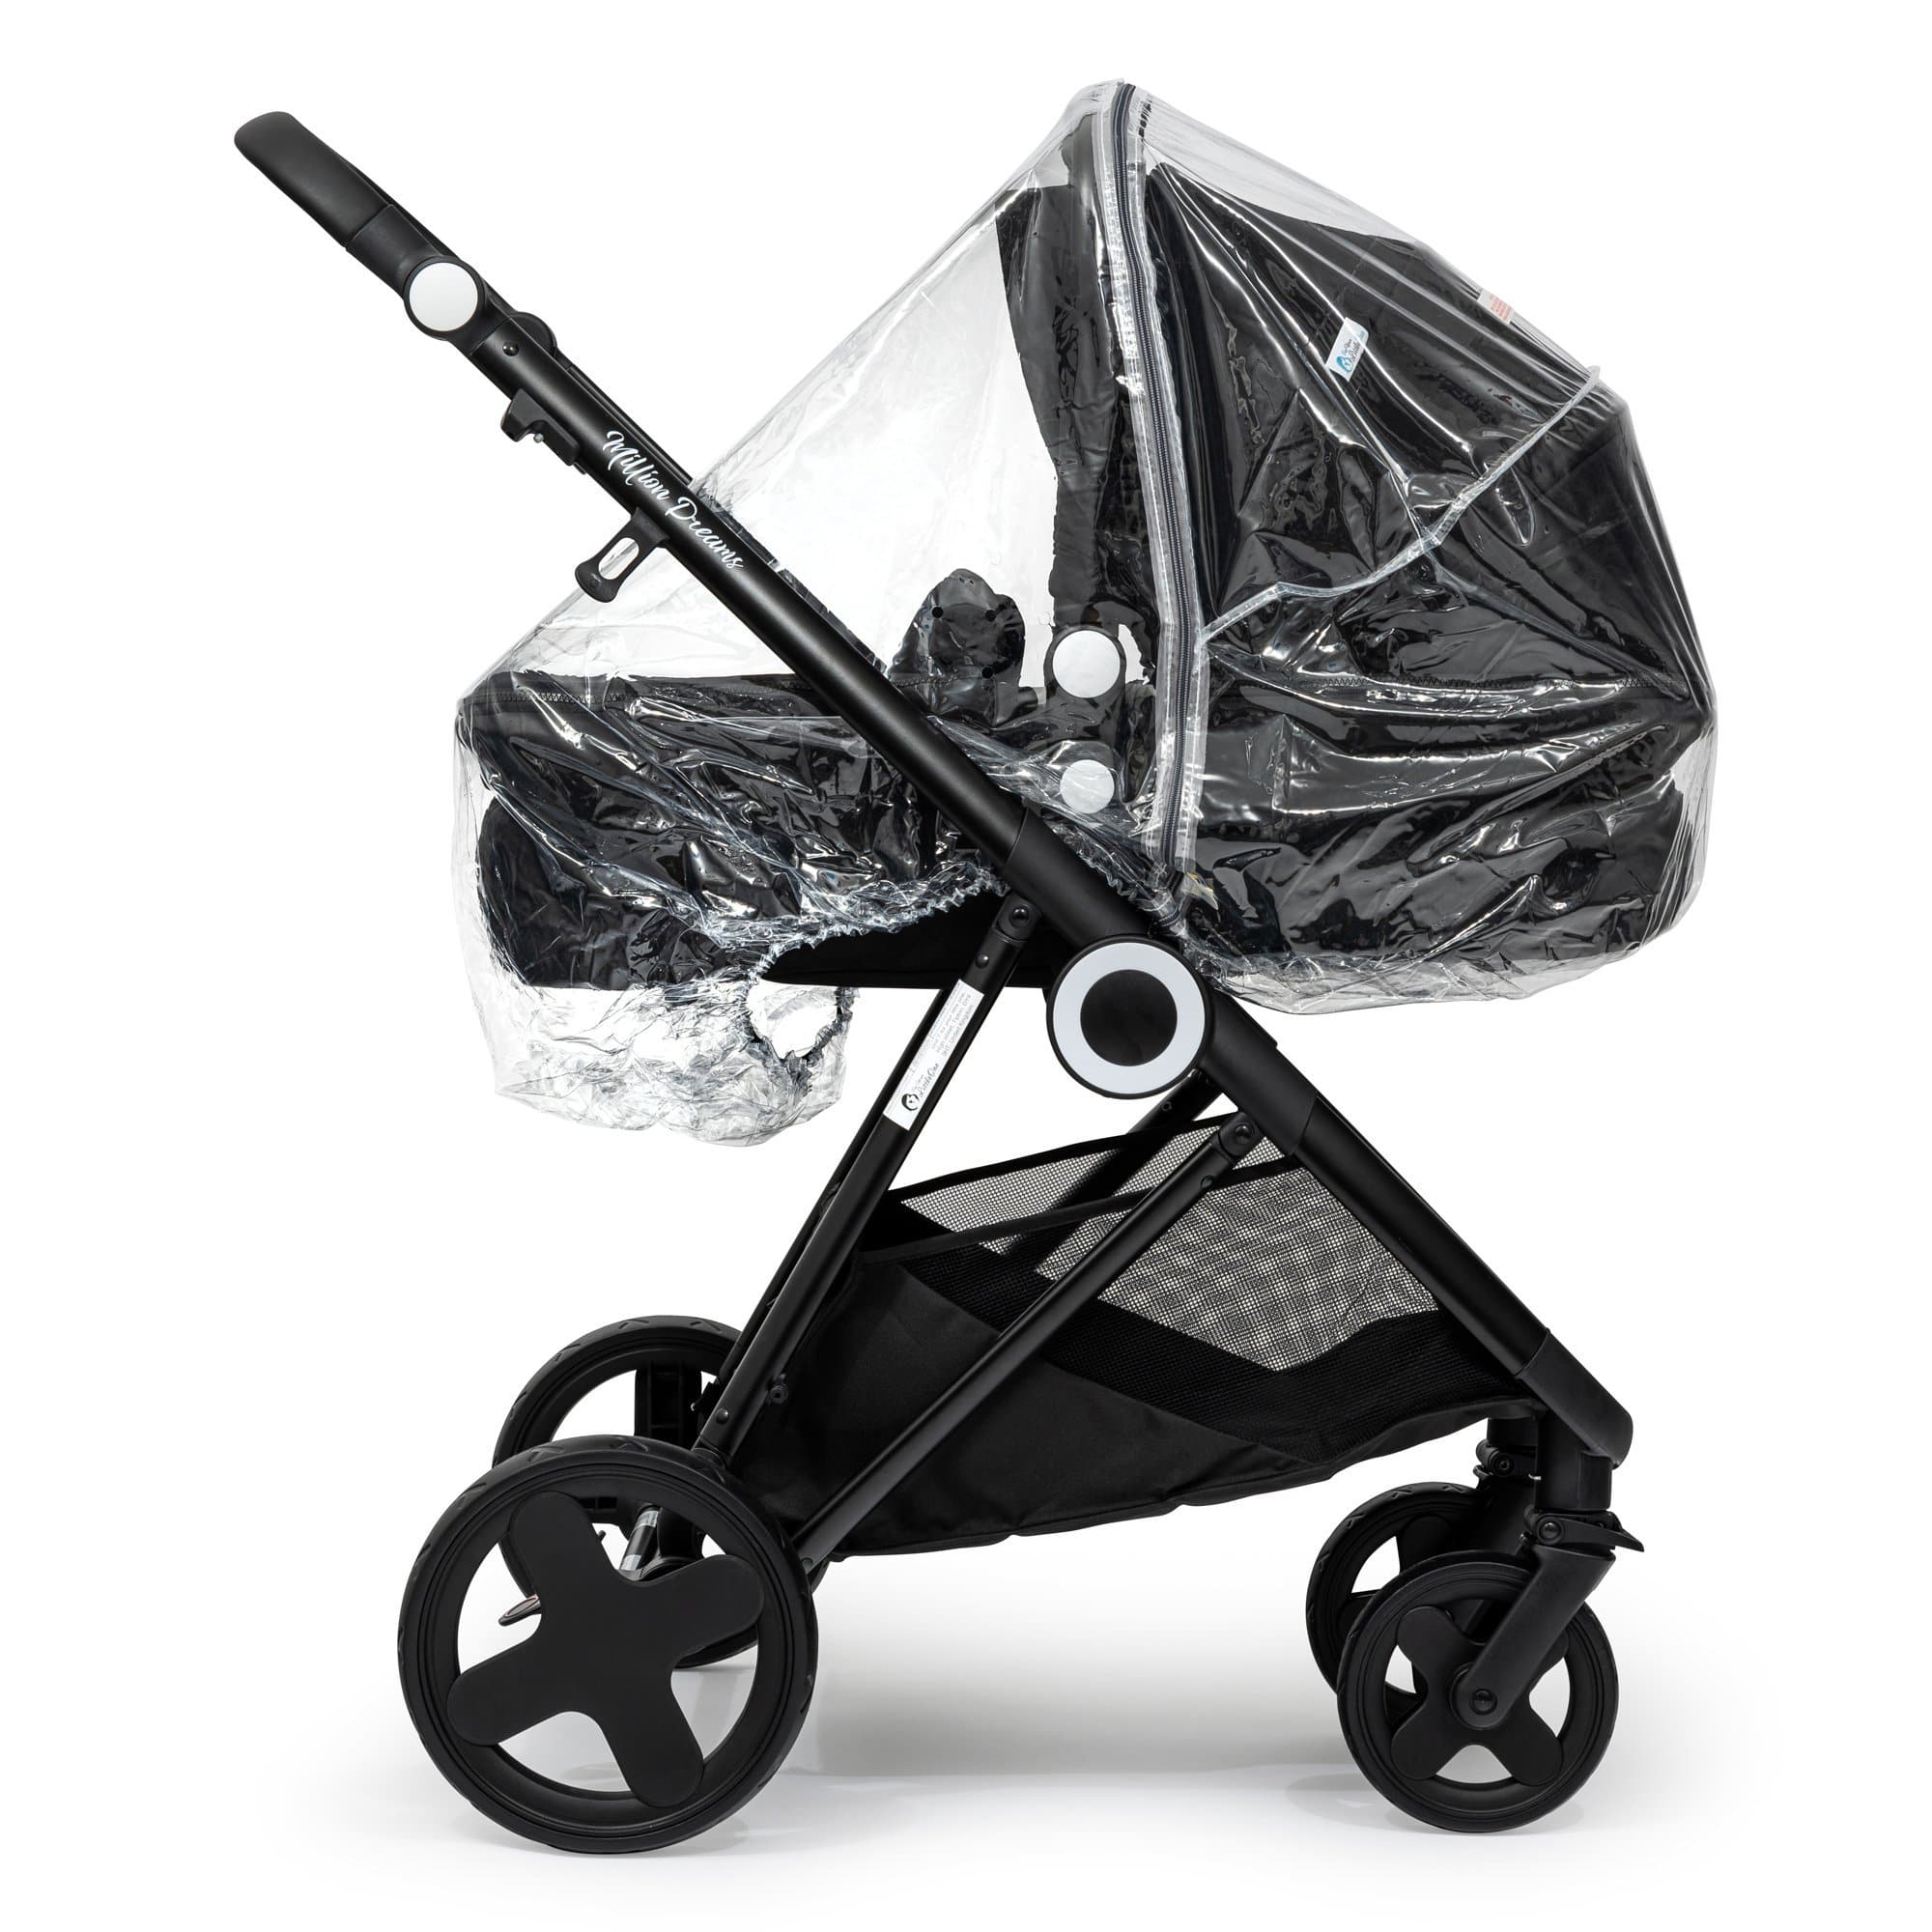 2 in 1 Rain Cover Compatible with Zeta - Fits All Models -  | For Your Little One